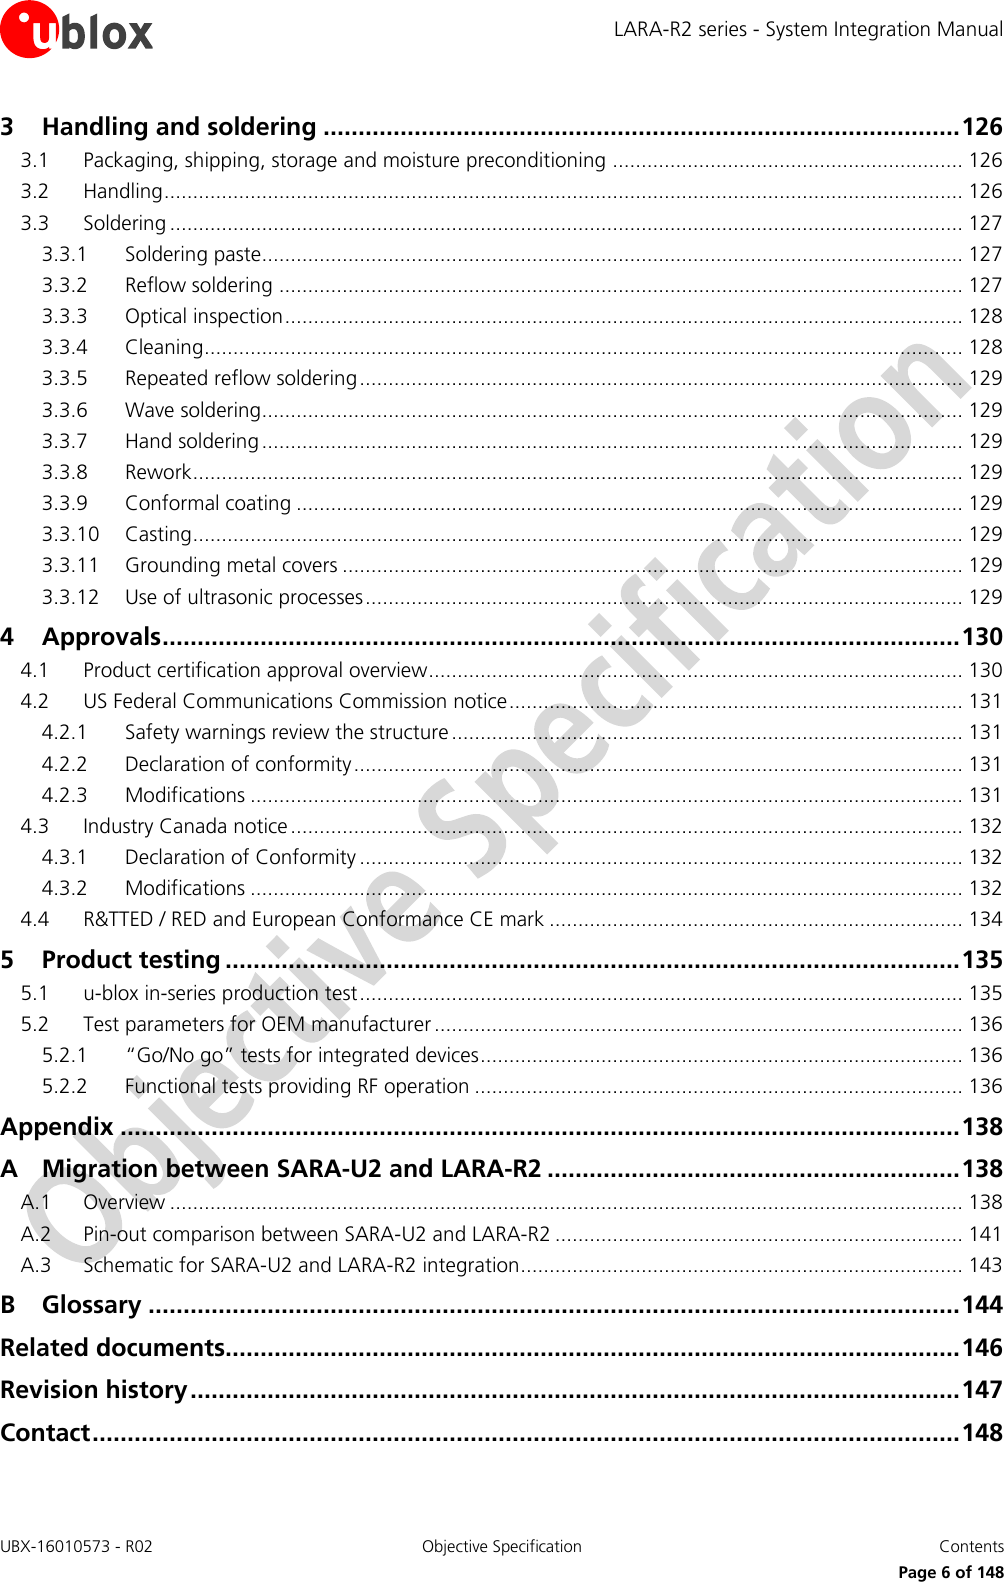 LARA-R2 series - System Integration Manual UBX-16010573 - R02  Objective Specification  Contents     Page 6 of 148 3 Handling and soldering ........................................................................................... 126 3.1 Packaging, shipping, storage and moisture preconditioning ............................................................. 126 3.2 Handling ........................................................................................................................................... 126 3.3 Soldering .......................................................................................................................................... 127 3.3.1 Soldering paste.......................................................................................................................... 127 3.3.2 Reflow soldering ....................................................................................................................... 127 3.3.3 Optical inspection ...................................................................................................................... 128 3.3.4 Cleaning .................................................................................................................................... 128 3.3.5 Repeated reflow soldering ......................................................................................................... 129 3.3.6 Wave soldering.......................................................................................................................... 129 3.3.7 Hand soldering .......................................................................................................................... 129 3.3.8 Rework ...................................................................................................................................... 129 3.3.9 Conformal coating .................................................................................................................... 129 3.3.10 Casting ...................................................................................................................................... 129 3.3.11 Grounding metal covers ............................................................................................................ 129 3.3.12 Use of ultrasonic processes ........................................................................................................ 129 4 Approvals .................................................................................................................. 130 4.1 Product certification approval overview ............................................................................................. 130 4.2 US Federal Communications Commission notice ............................................................................... 131 4.2.1 Safety warnings review the structure ......................................................................................... 131 4.2.2 Declaration of conformity .......................................................................................................... 131 4.2.3 Modifications ............................................................................................................................ 131 4.3 Industry Canada notice ..................................................................................................................... 132 4.3.1 Declaration of Conformity ......................................................................................................... 132 4.3.2 Modifications ............................................................................................................................ 132 4.4 R&amp;TTED / RED and European Conformance CE mark ........................................................................ 134 5 Product testing ......................................................................................................... 135 5.1 u-blox in-series production test ......................................................................................................... 135 5.2 Test parameters for OEM manufacturer ............................................................................................ 136 5.2.1 “Go/No go” tests for integrated devices .................................................................................... 136 5.2.2 Functional tests providing RF operation ..................................................................................... 136 Appendix ........................................................................................................................ 138 A Migration between SARA-U2 and LARA-R2 ........................................................... 138 A.1 Overview .......................................................................................................................................... 138 A.2 Pin-out comparison between SARA-U2 and LARA-R2 ....................................................................... 141 A.3 Schematic for SARA-U2 and LARA-R2 integration ............................................................................. 143 B Glossary .................................................................................................................... 144 Related documents......................................................................................................... 146 Revision history .............................................................................................................. 147 Contact ............................................................................................................................ 148  